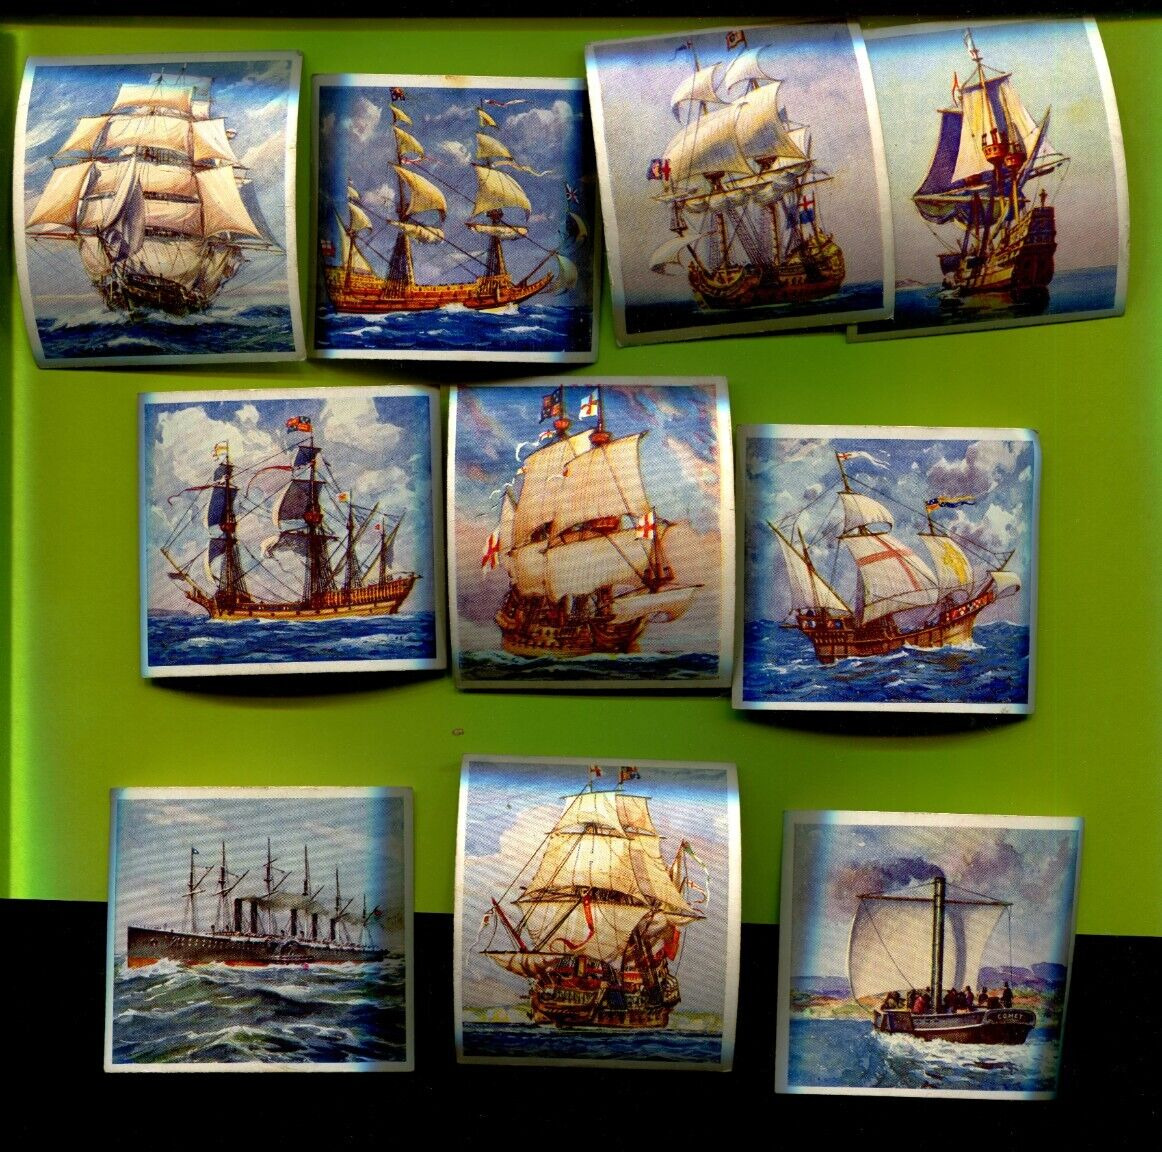 1938 GODFREY PHILLIPS CIGARETTES SHIPS THAT HAVE MADE HISTORY 10 TOBACCO CARDS